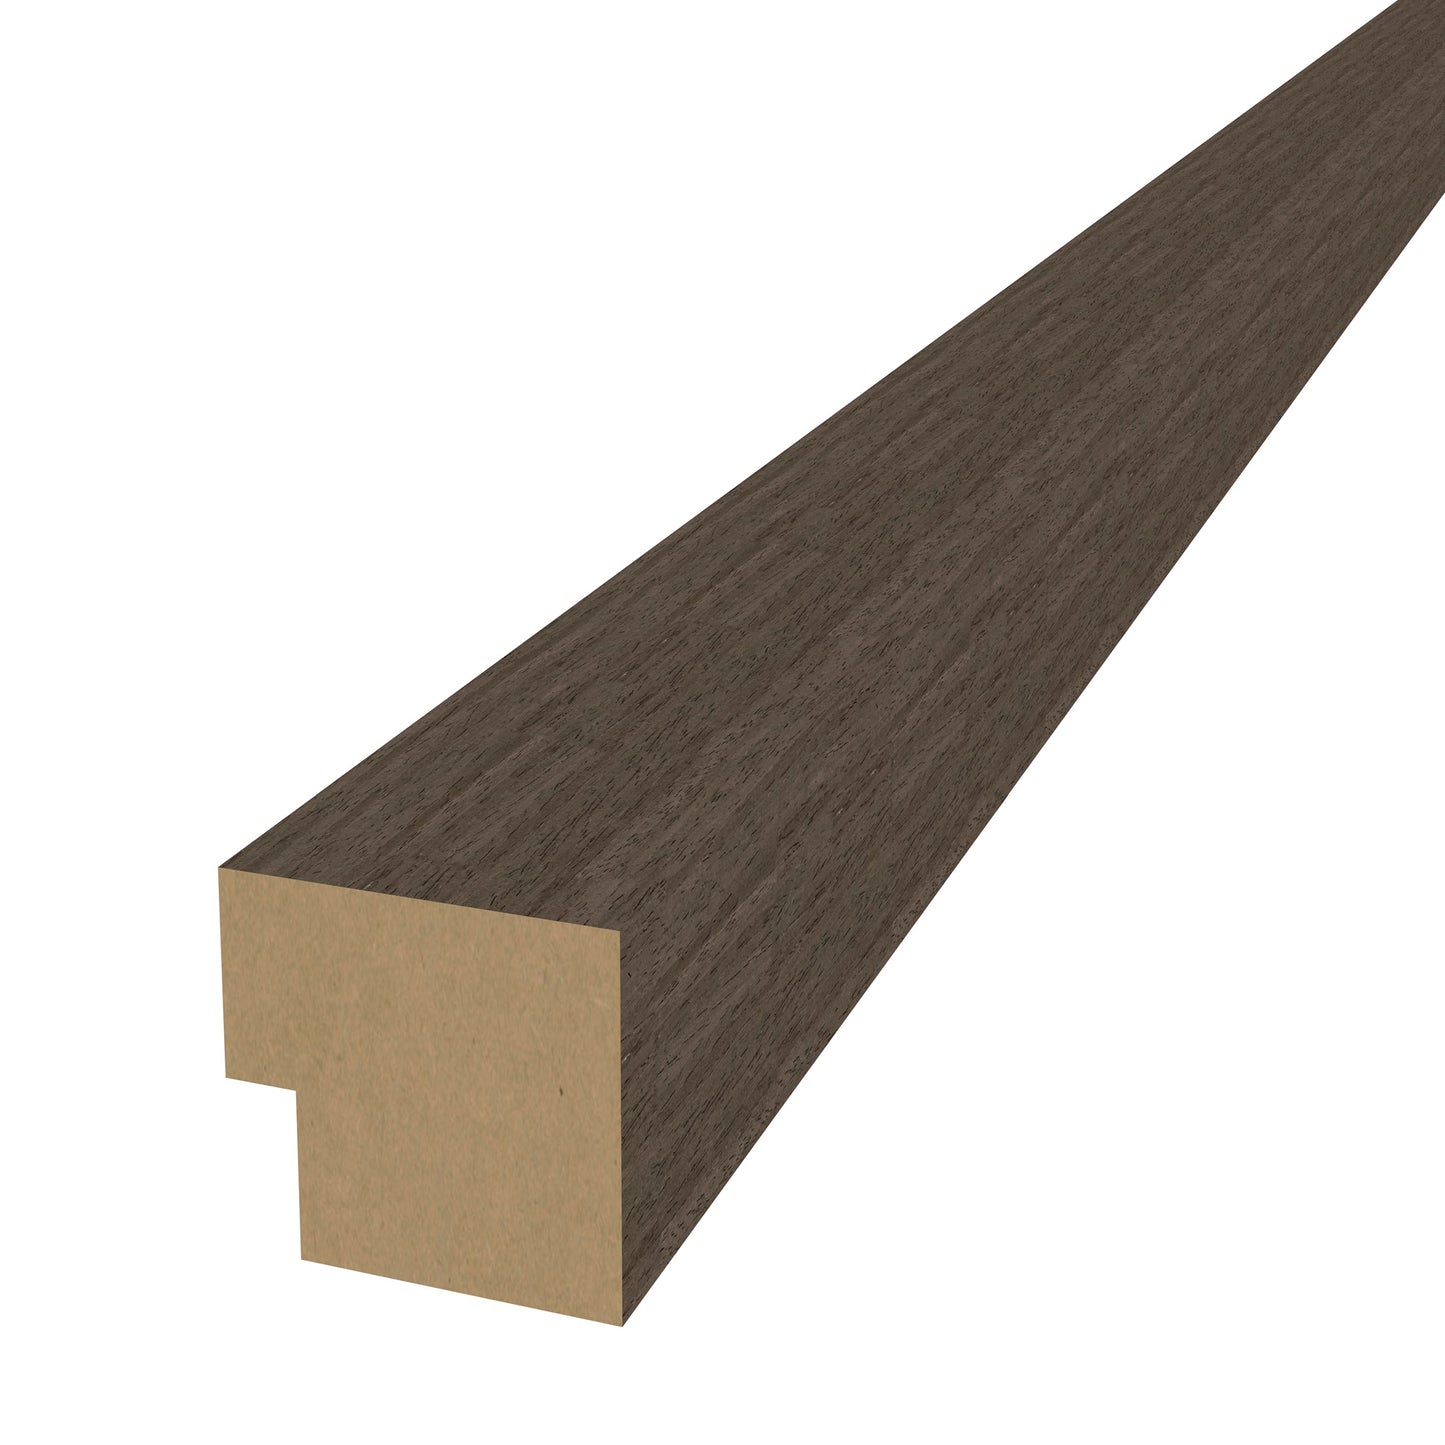 Smoked Oak Acoustic Wood Wall Panel End Bar Piece Trim Series 1 - 240cm